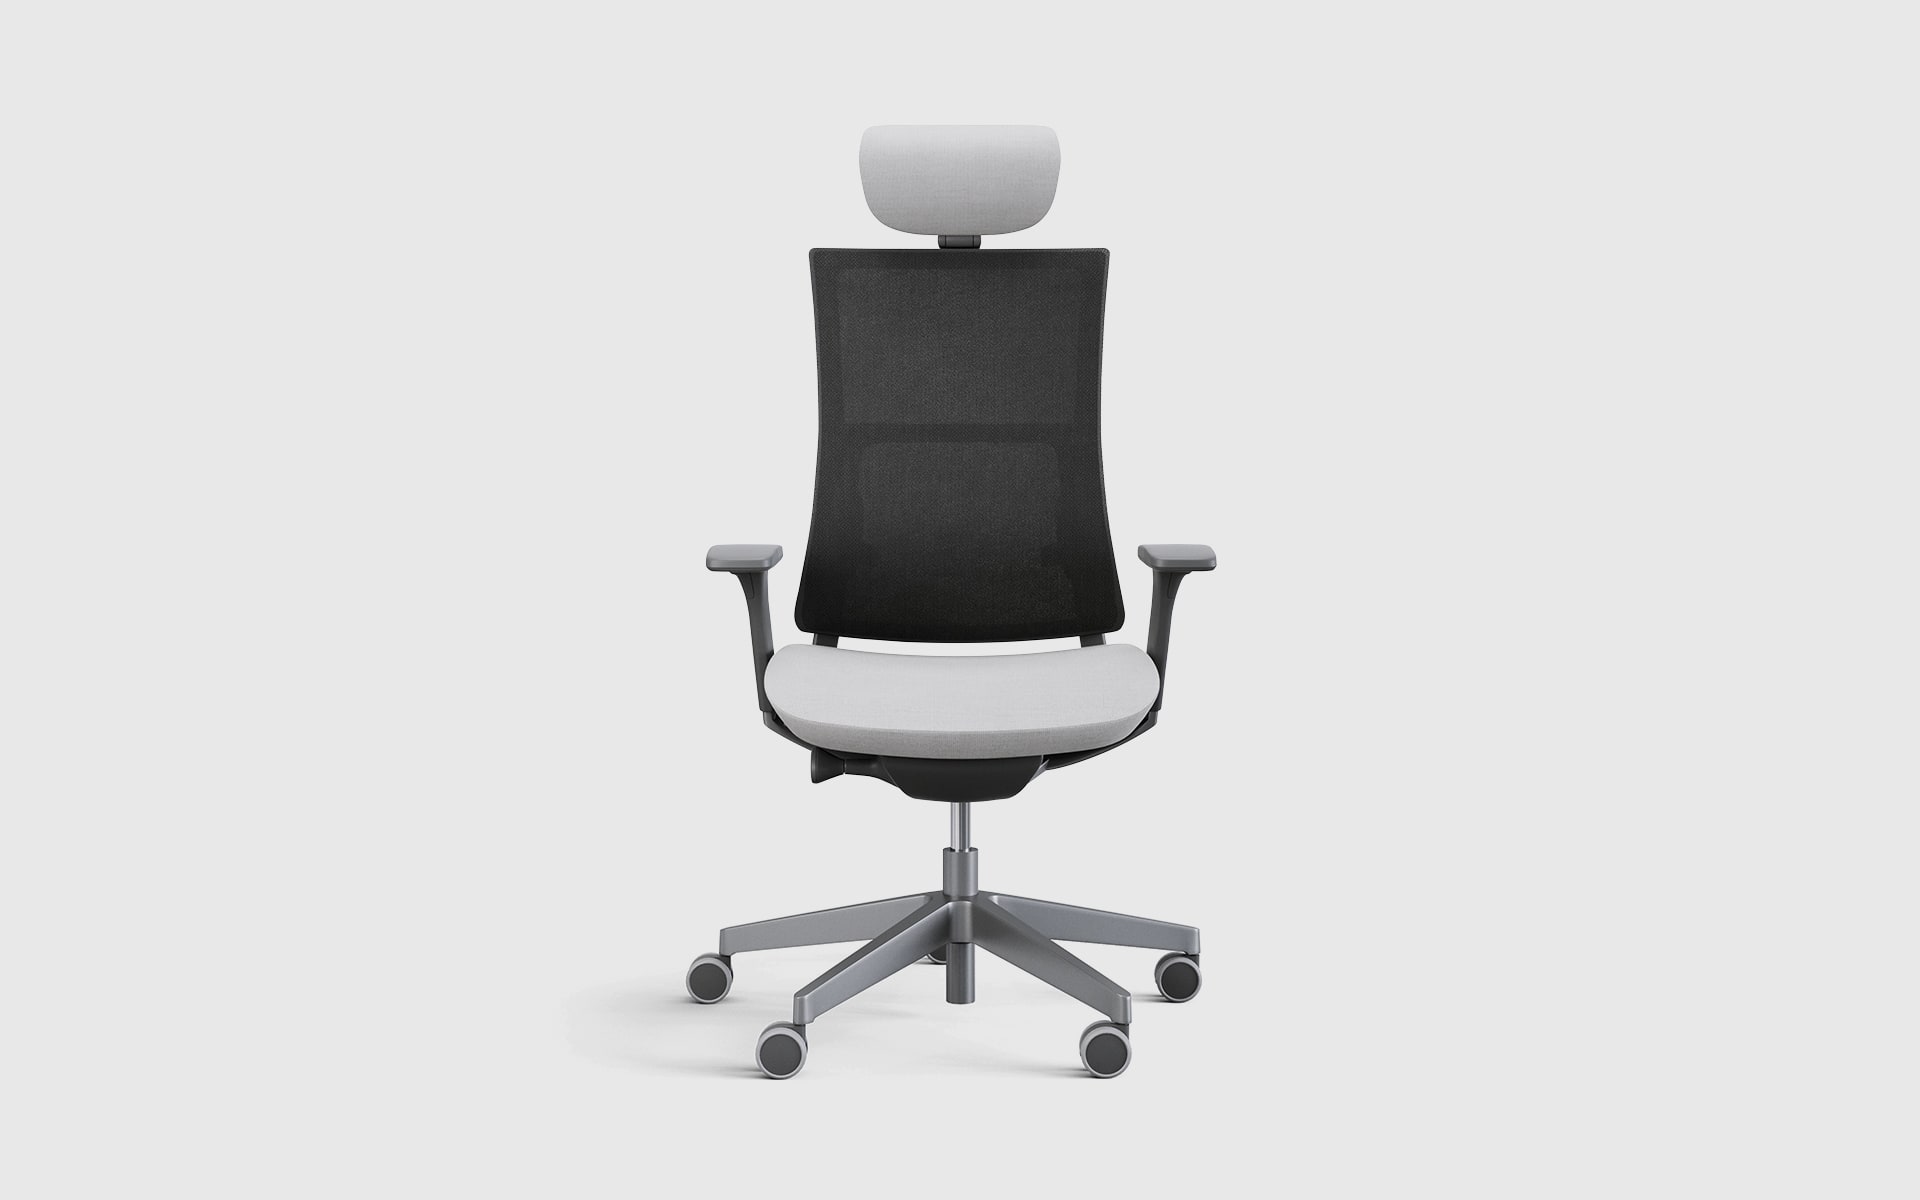 Profim Violle office chair by ITO Design in black and light grey